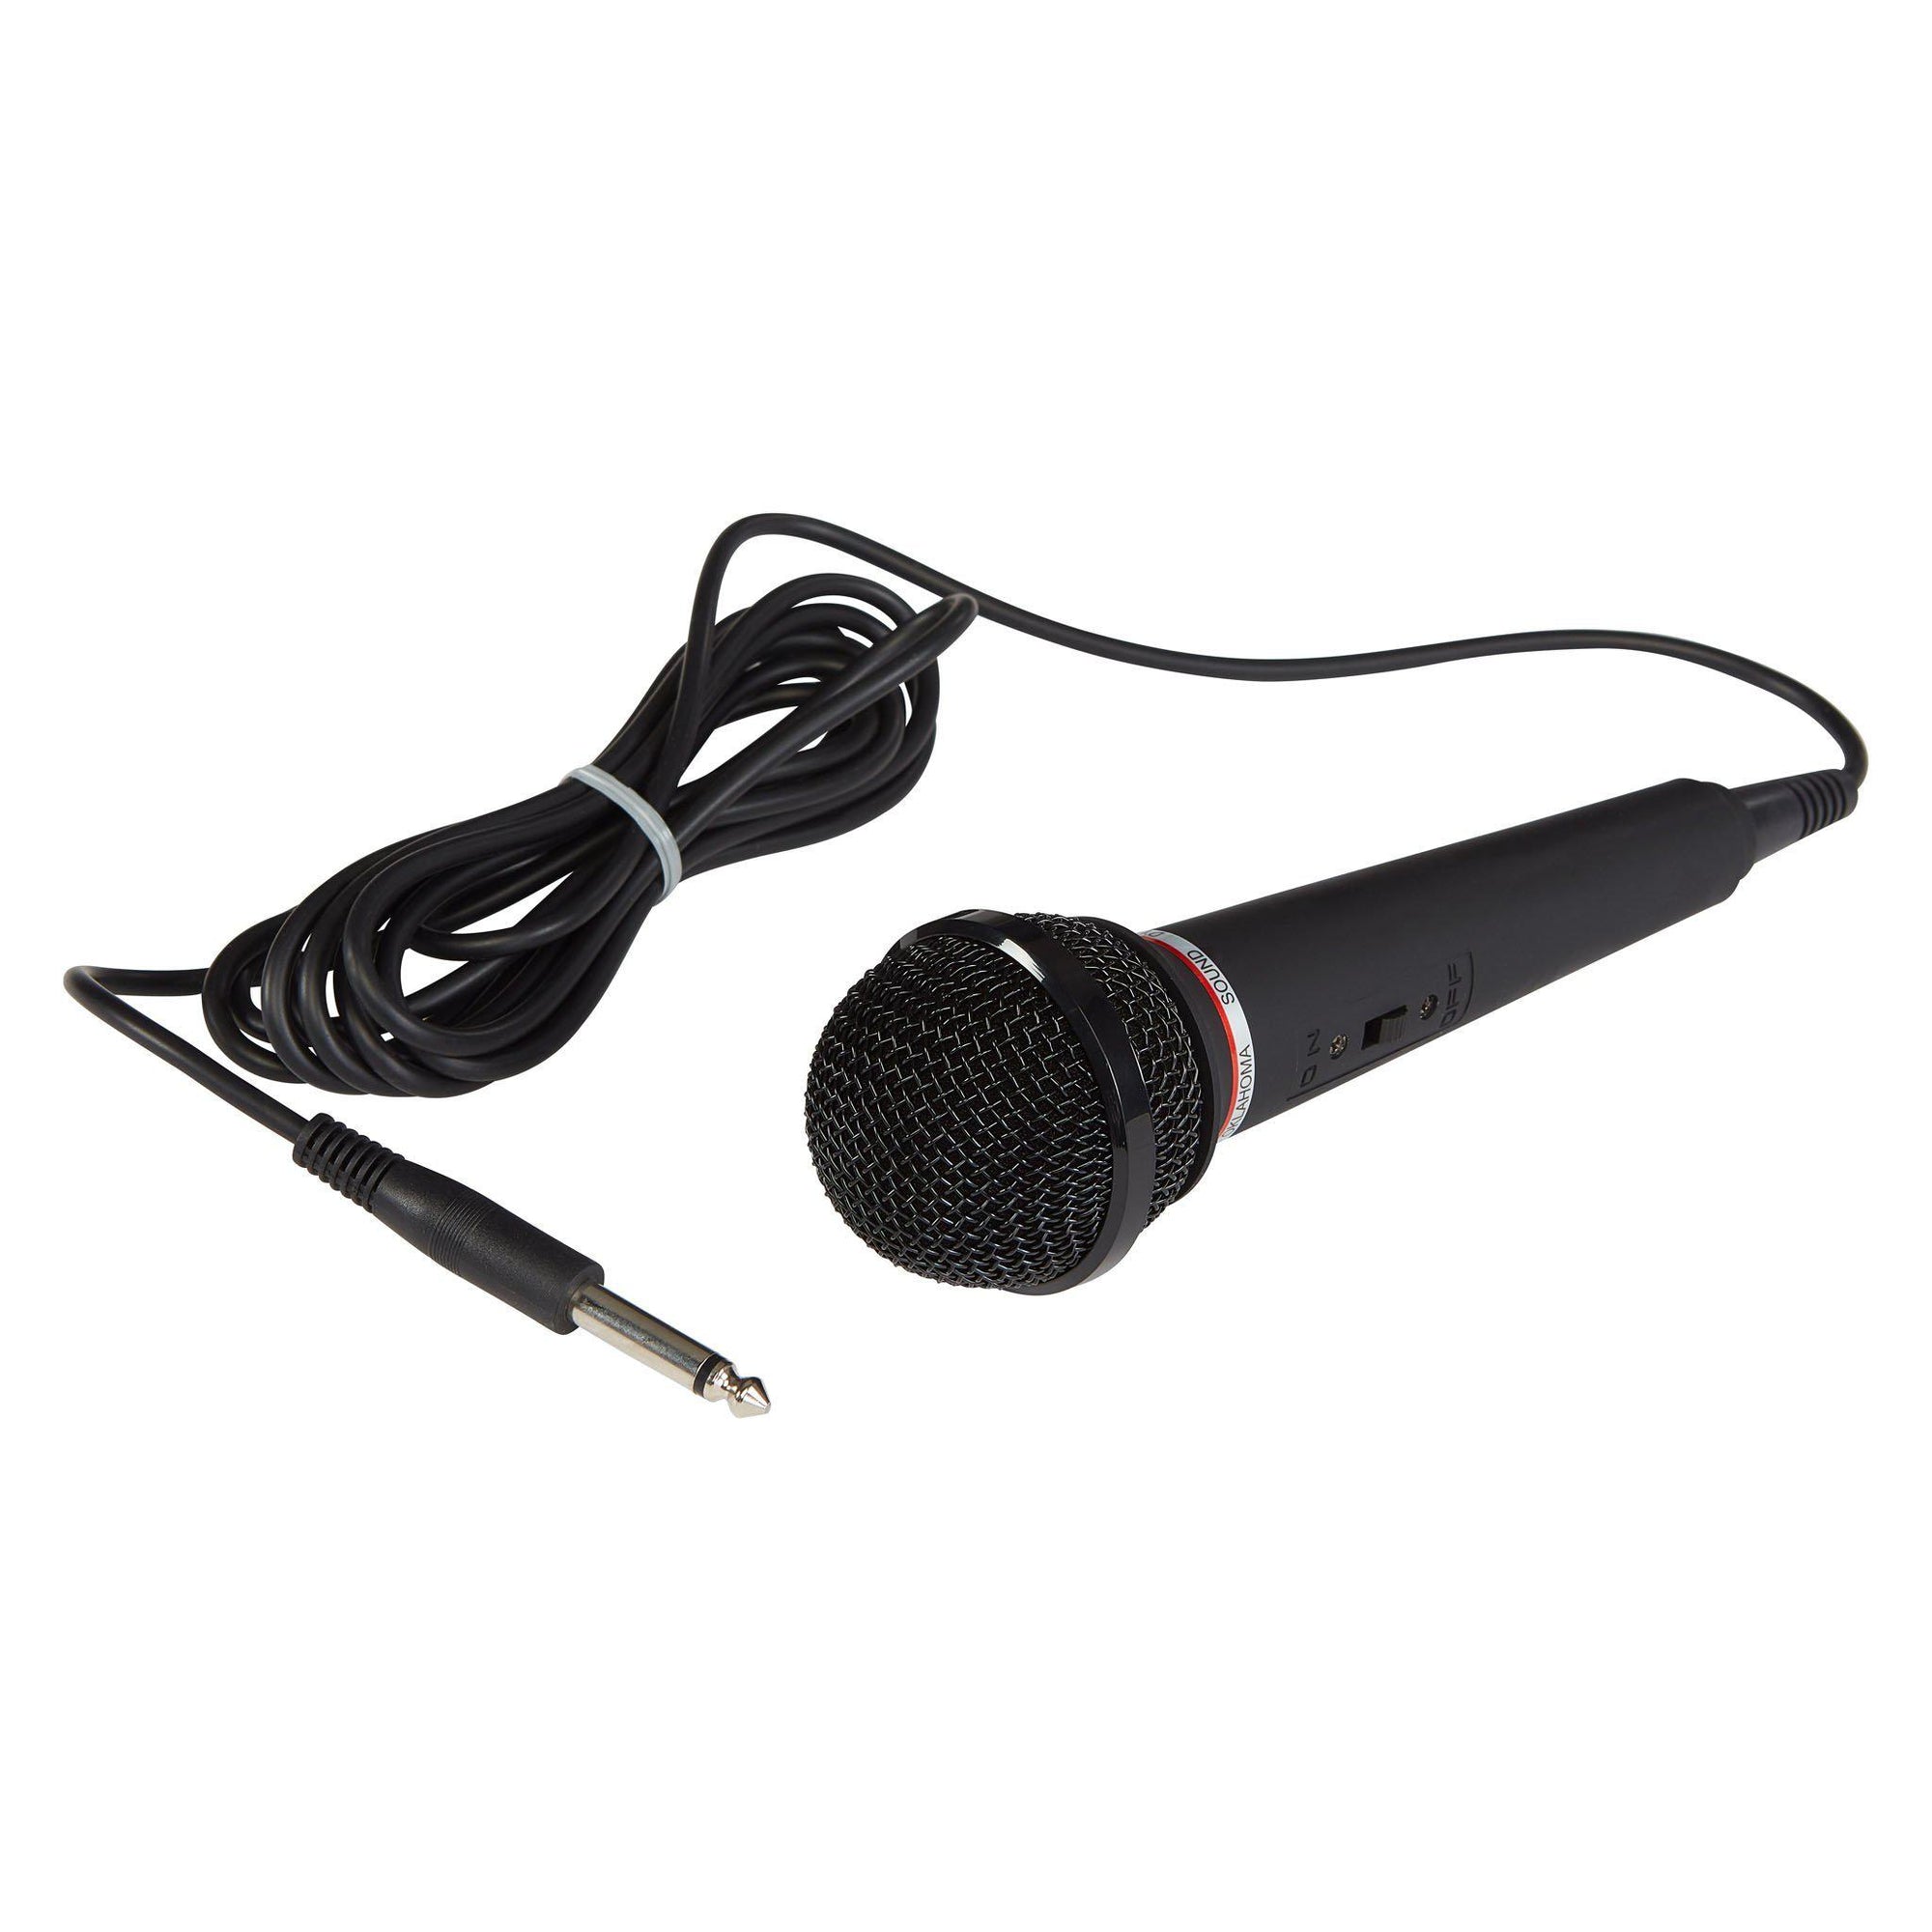 Oklahoma Sound® Dynamic Unidirectional Microphone with 9-Foot Cable-Lecterns & Podiums-